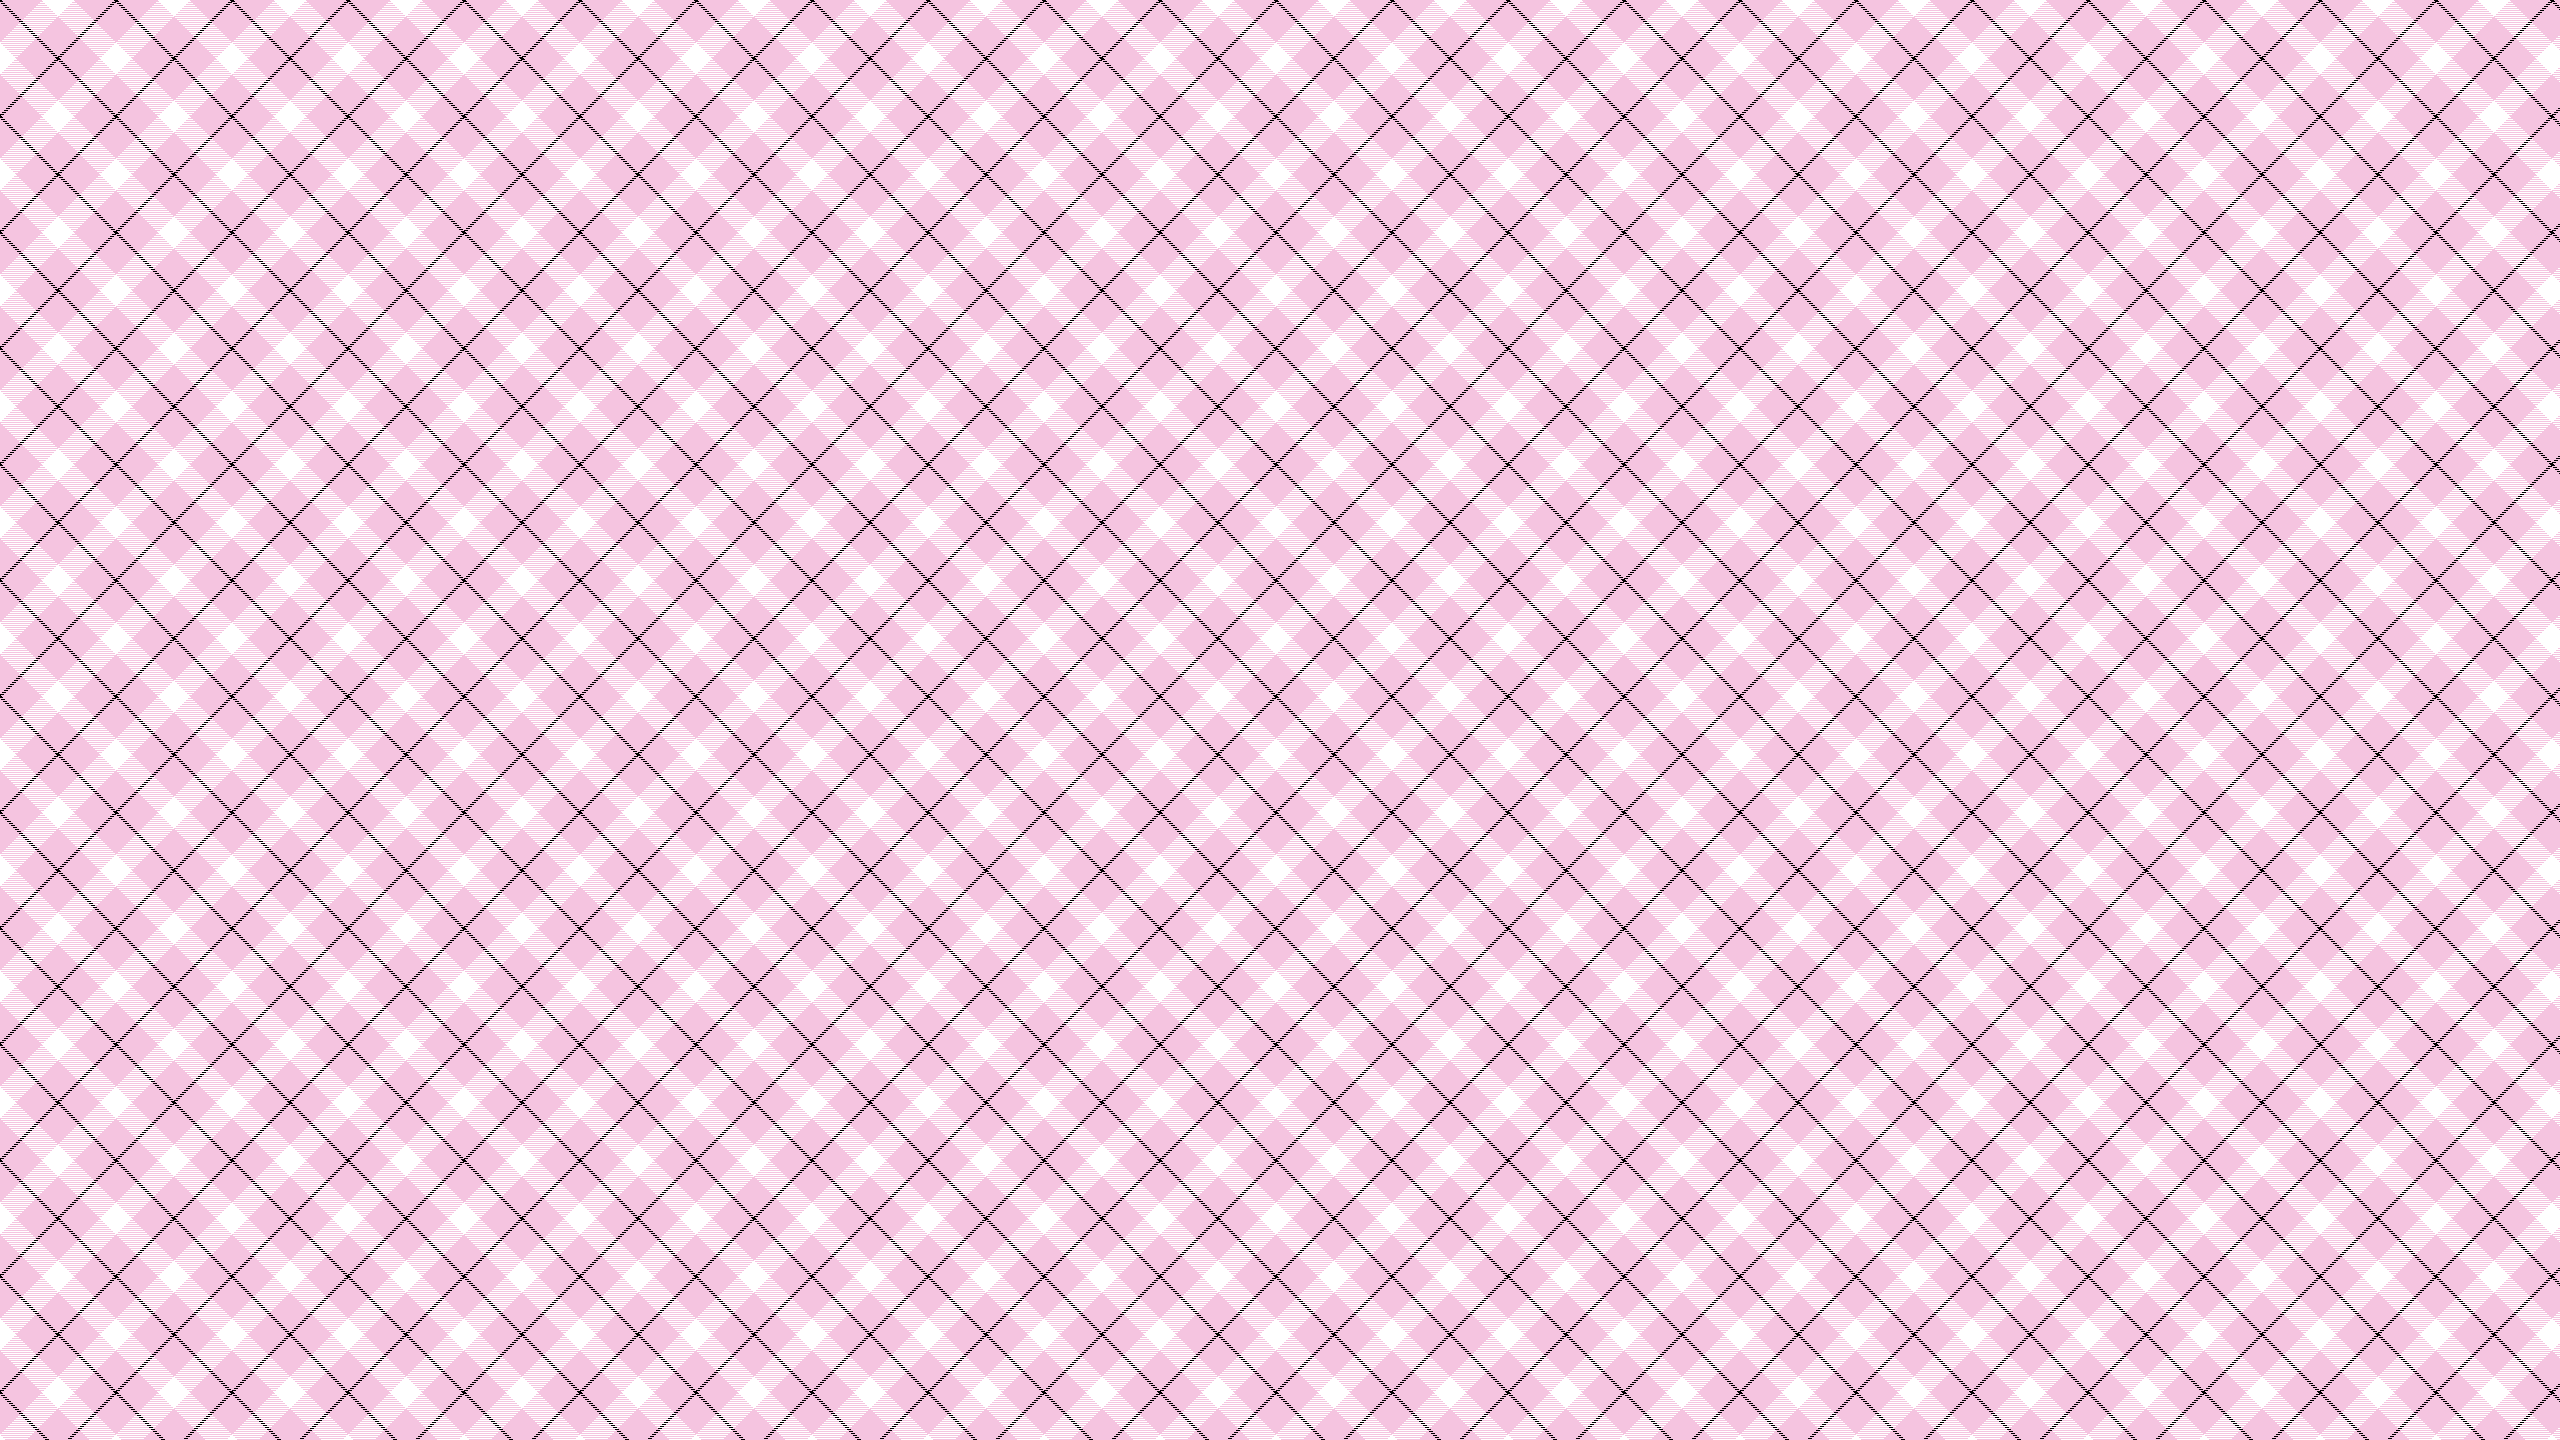 This Pink Plaid Desktop Wallpaper Is Easy Just Save The